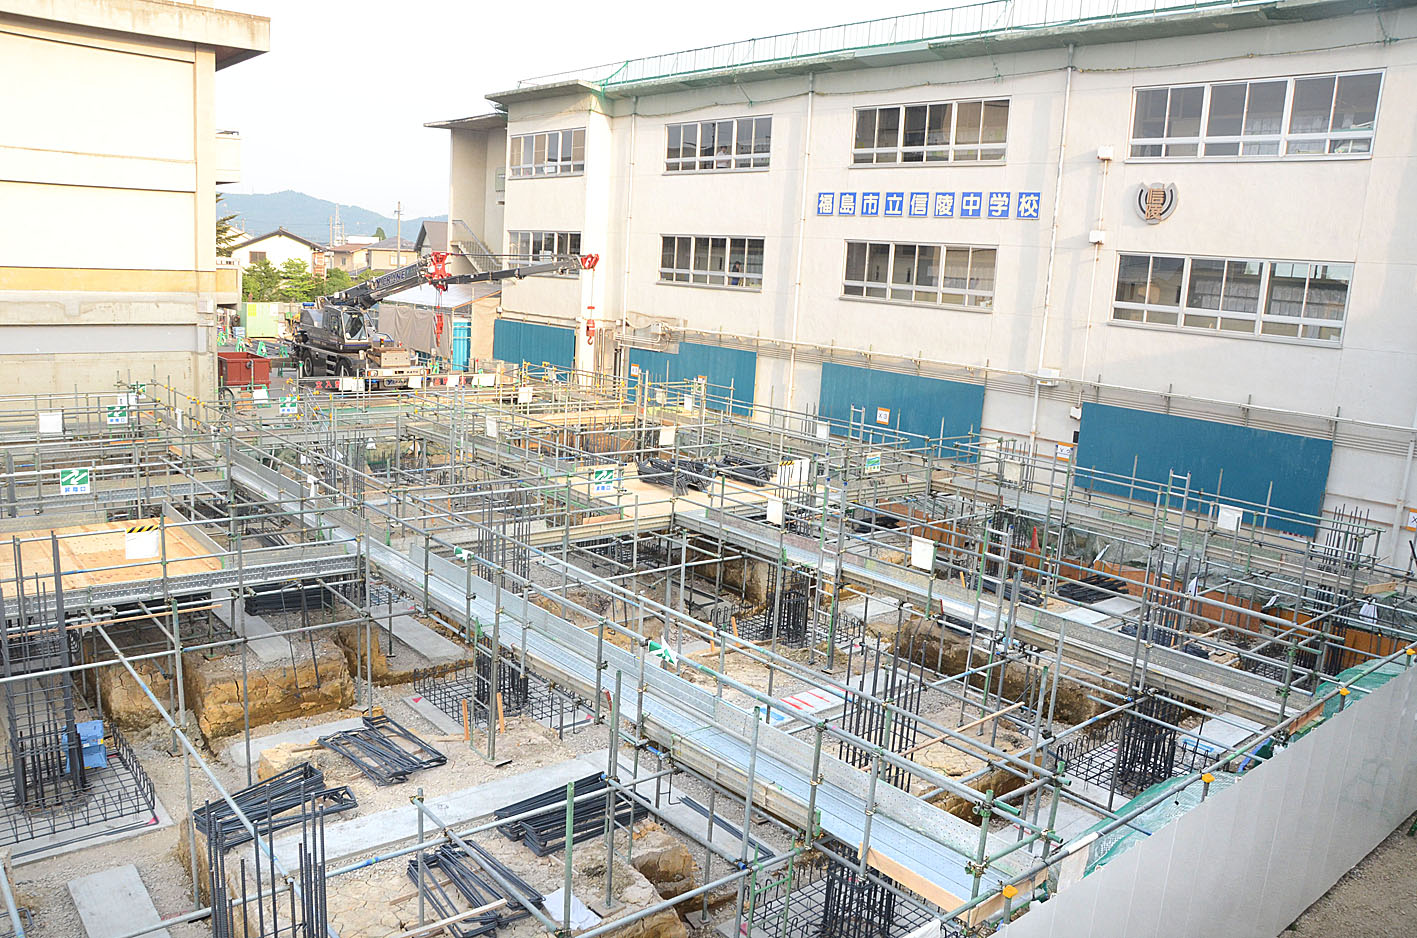 A new building is under construction at Shinryo Junior High School in the city of Fukushima to replace old structures that do not meet quake-resistance criteria. Fukushima is lagging other prefectures in reinforcing school buildings. | FUKUSHIMA MINPO